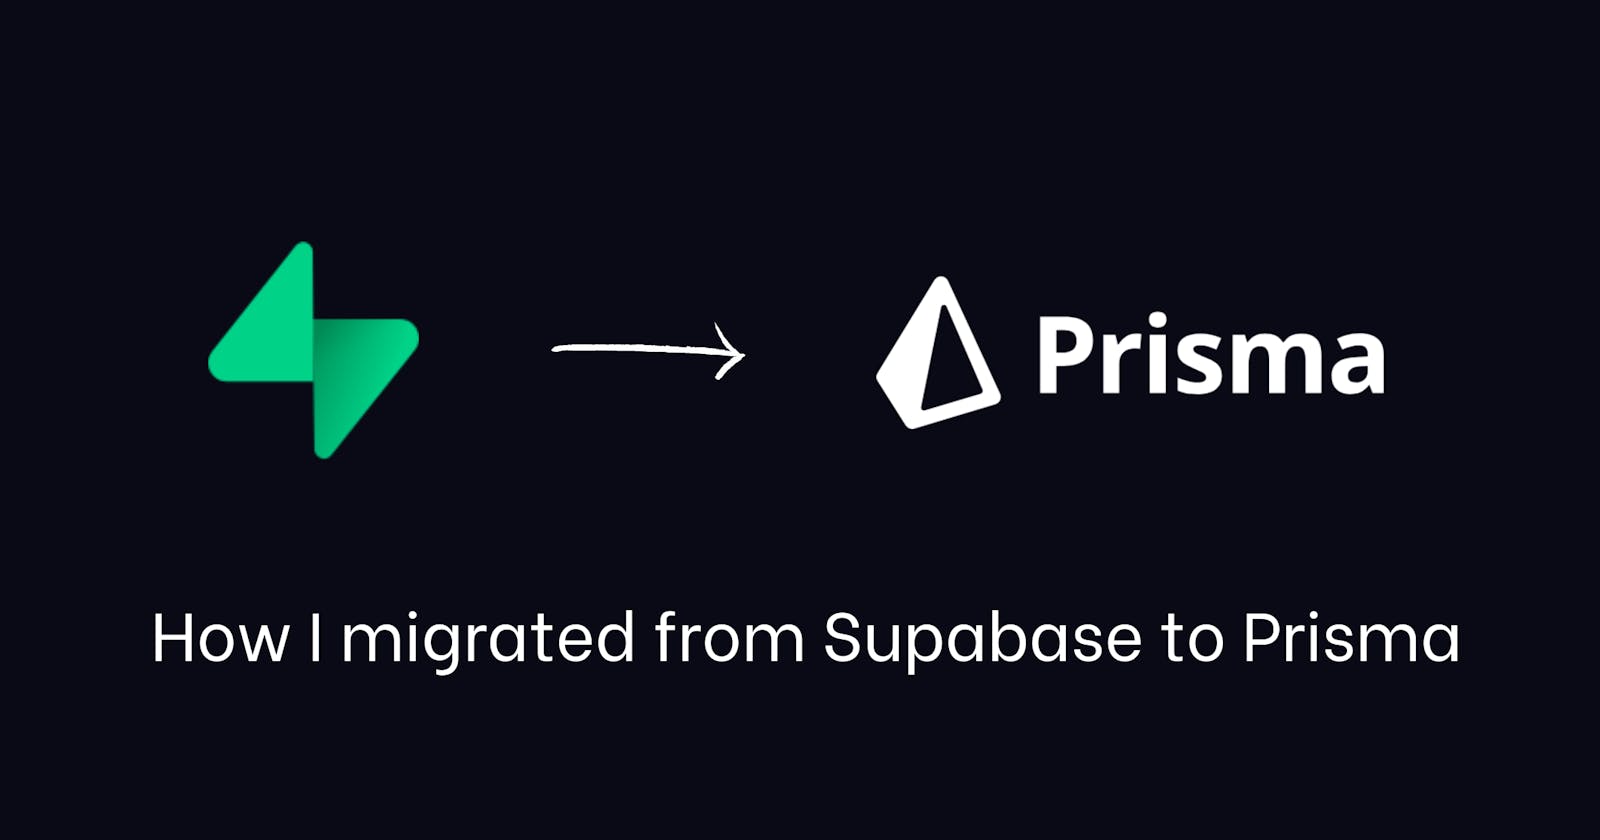 How I migrated from Supabase to Prisma